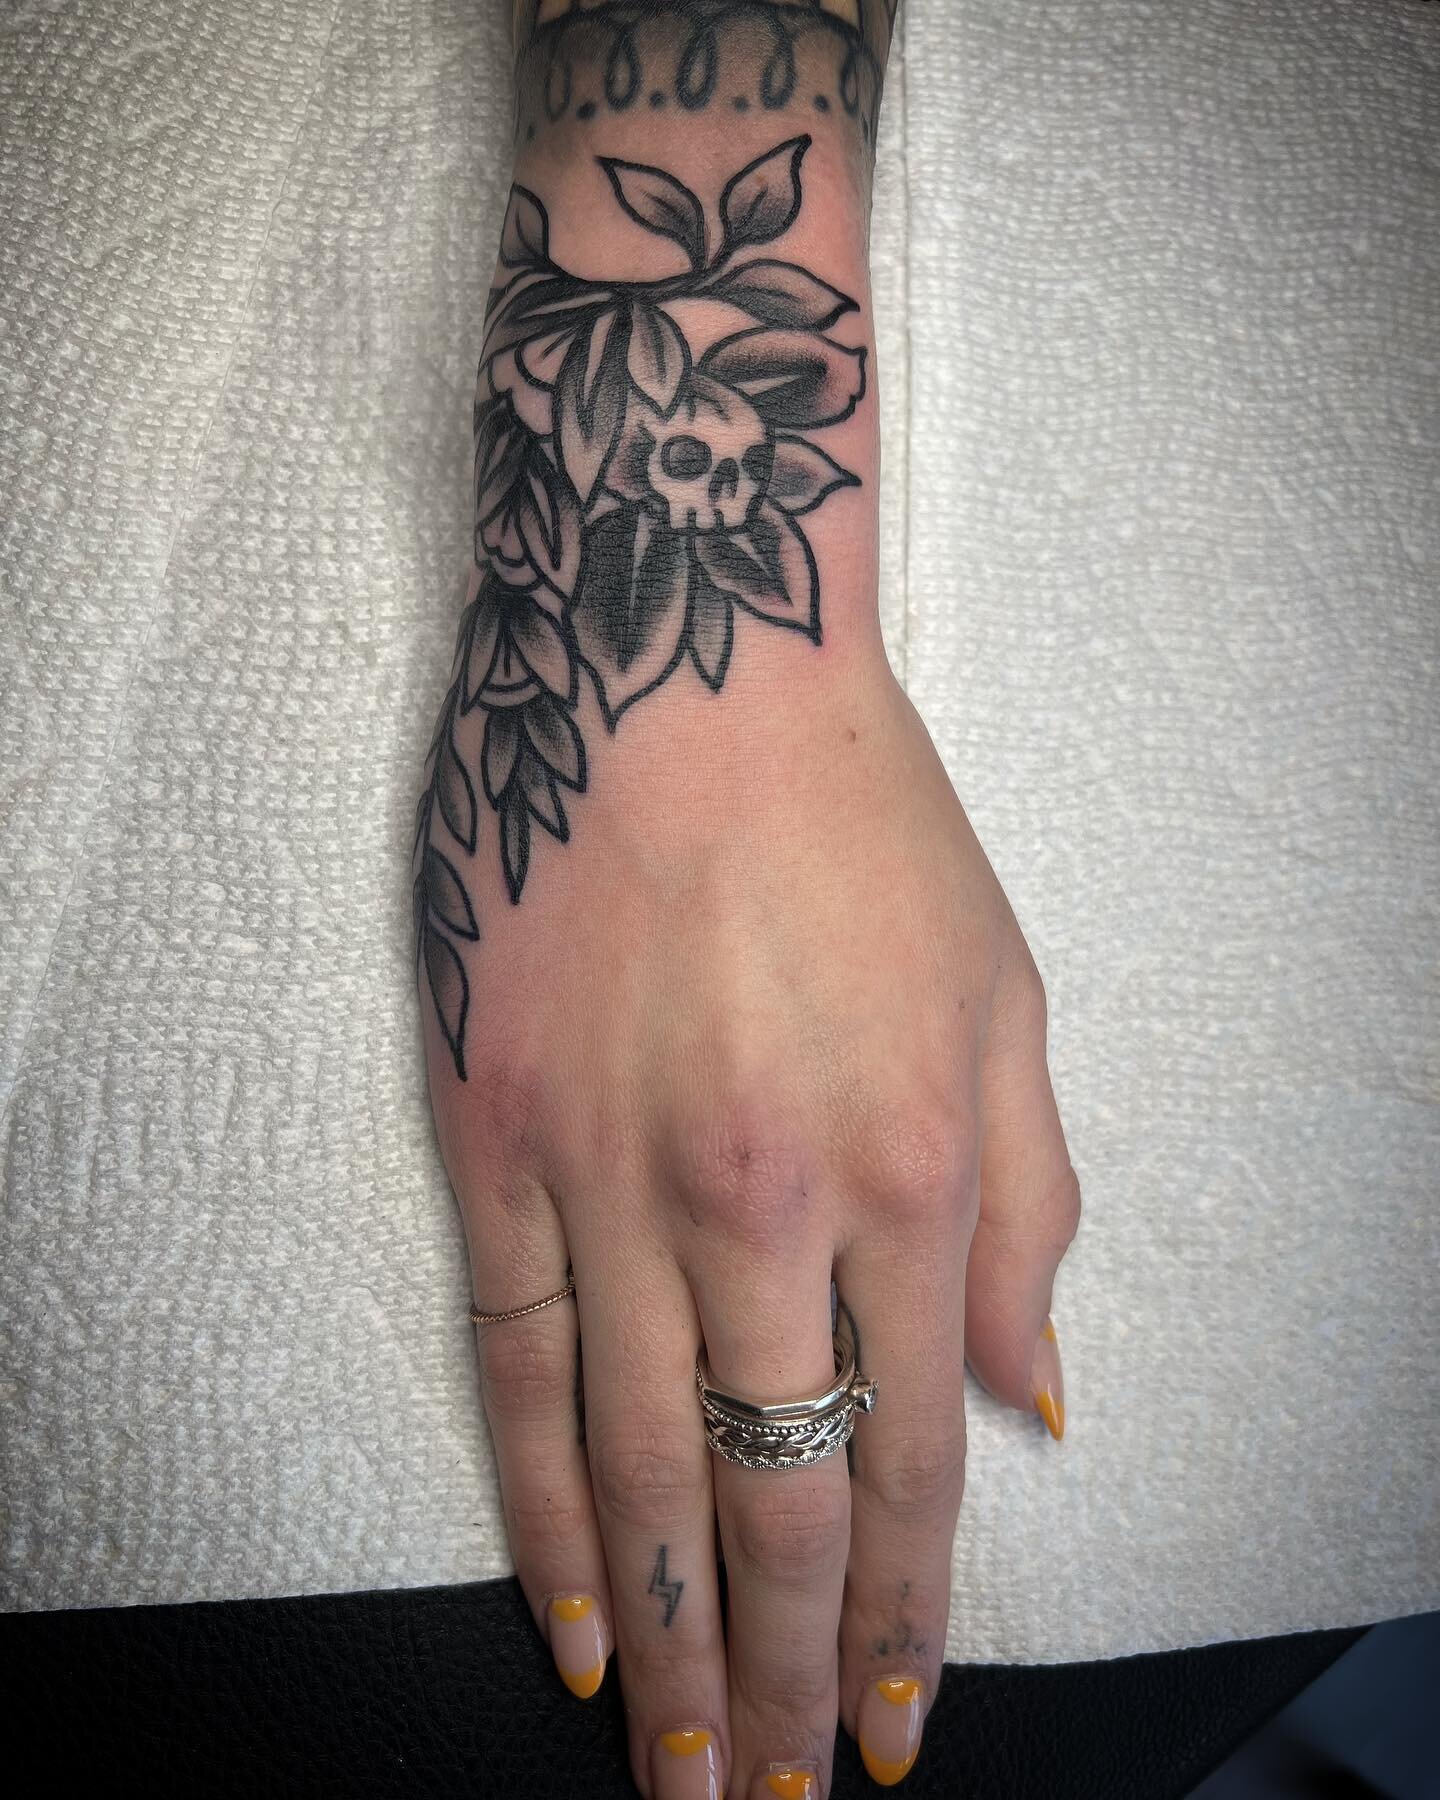 Also this cute hand tat! Thanks Emily! PS I have more of this layout with different styles drawn up if y&rsquo;all want a hand tat! 
.
:
.

#floraltattoo #floraldesign #floral #floralart #forearmtattoo #tattoo #linework #botanicalart #botanicalillust